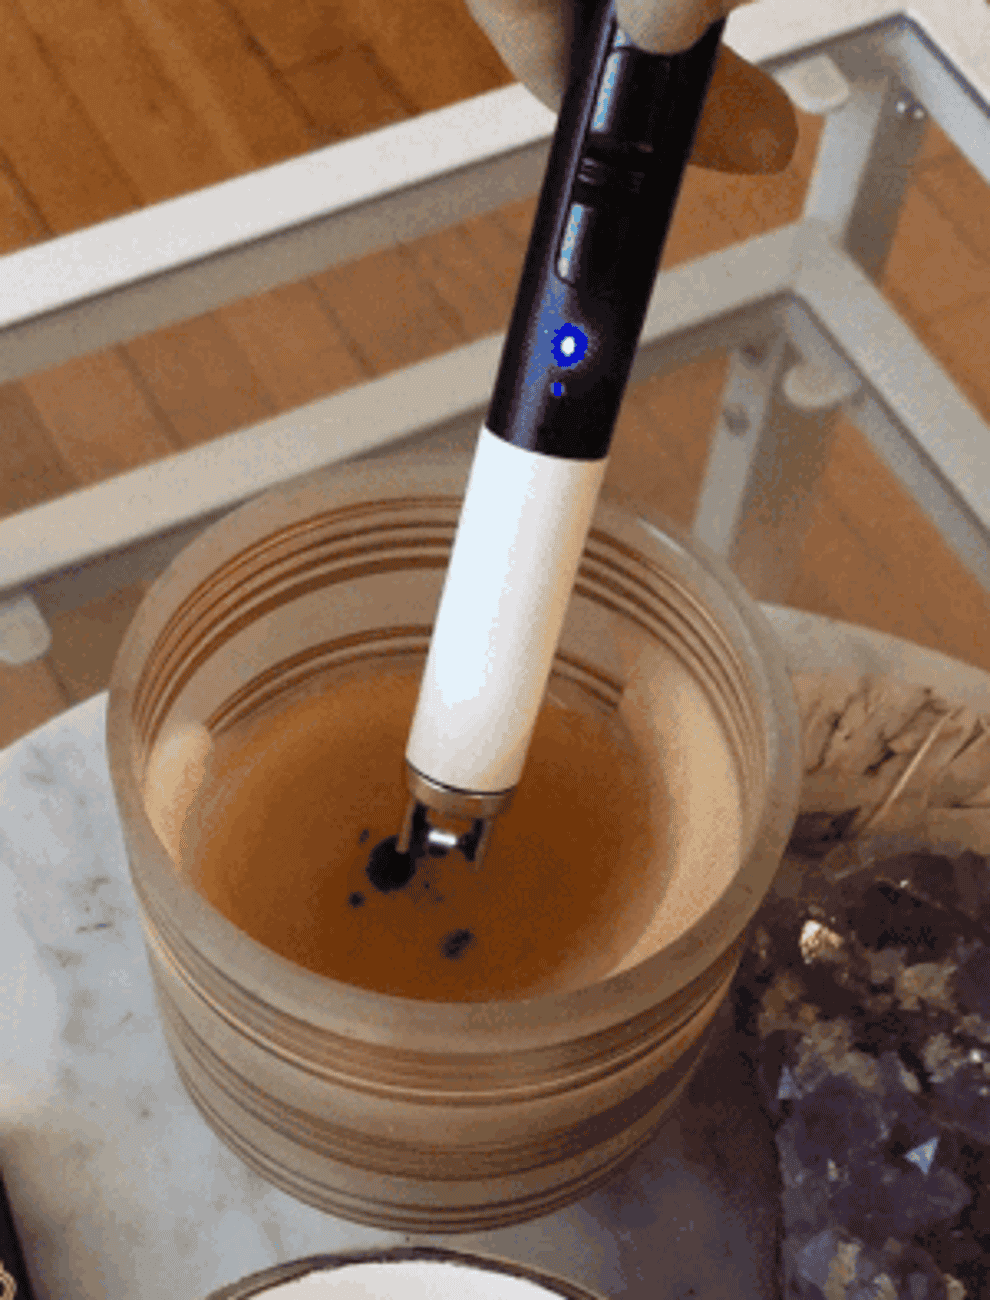 a gif of the buzzfeed editor using the lighter to light a candle